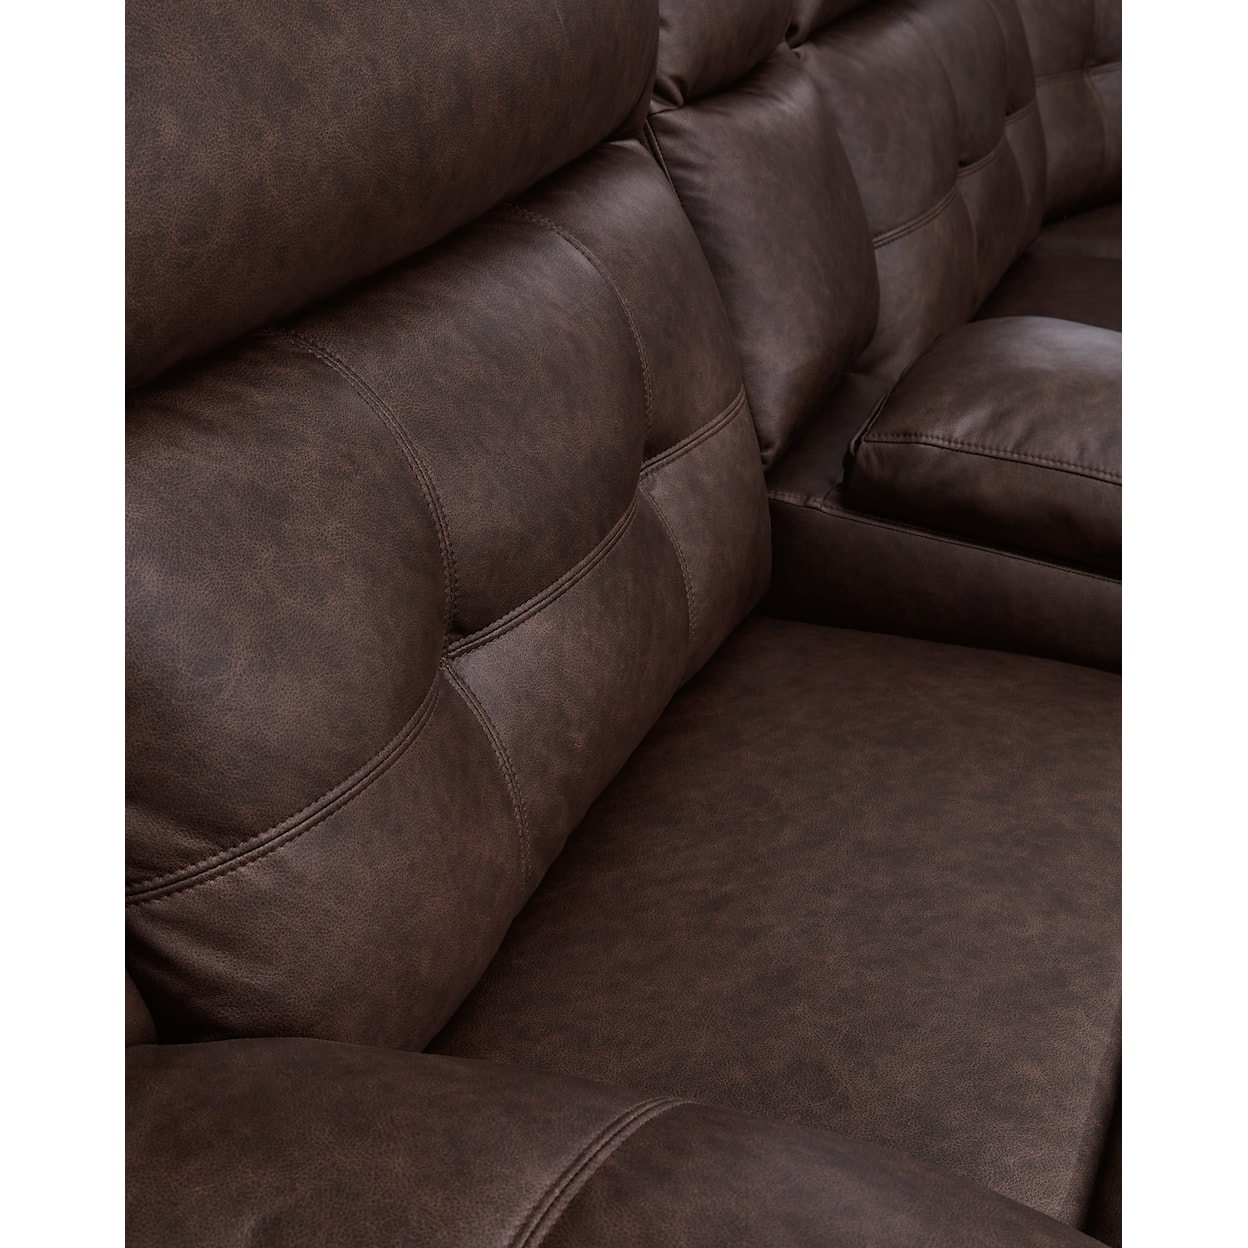 Signature Design by Ashley Punch Up Power Reclining Sofa